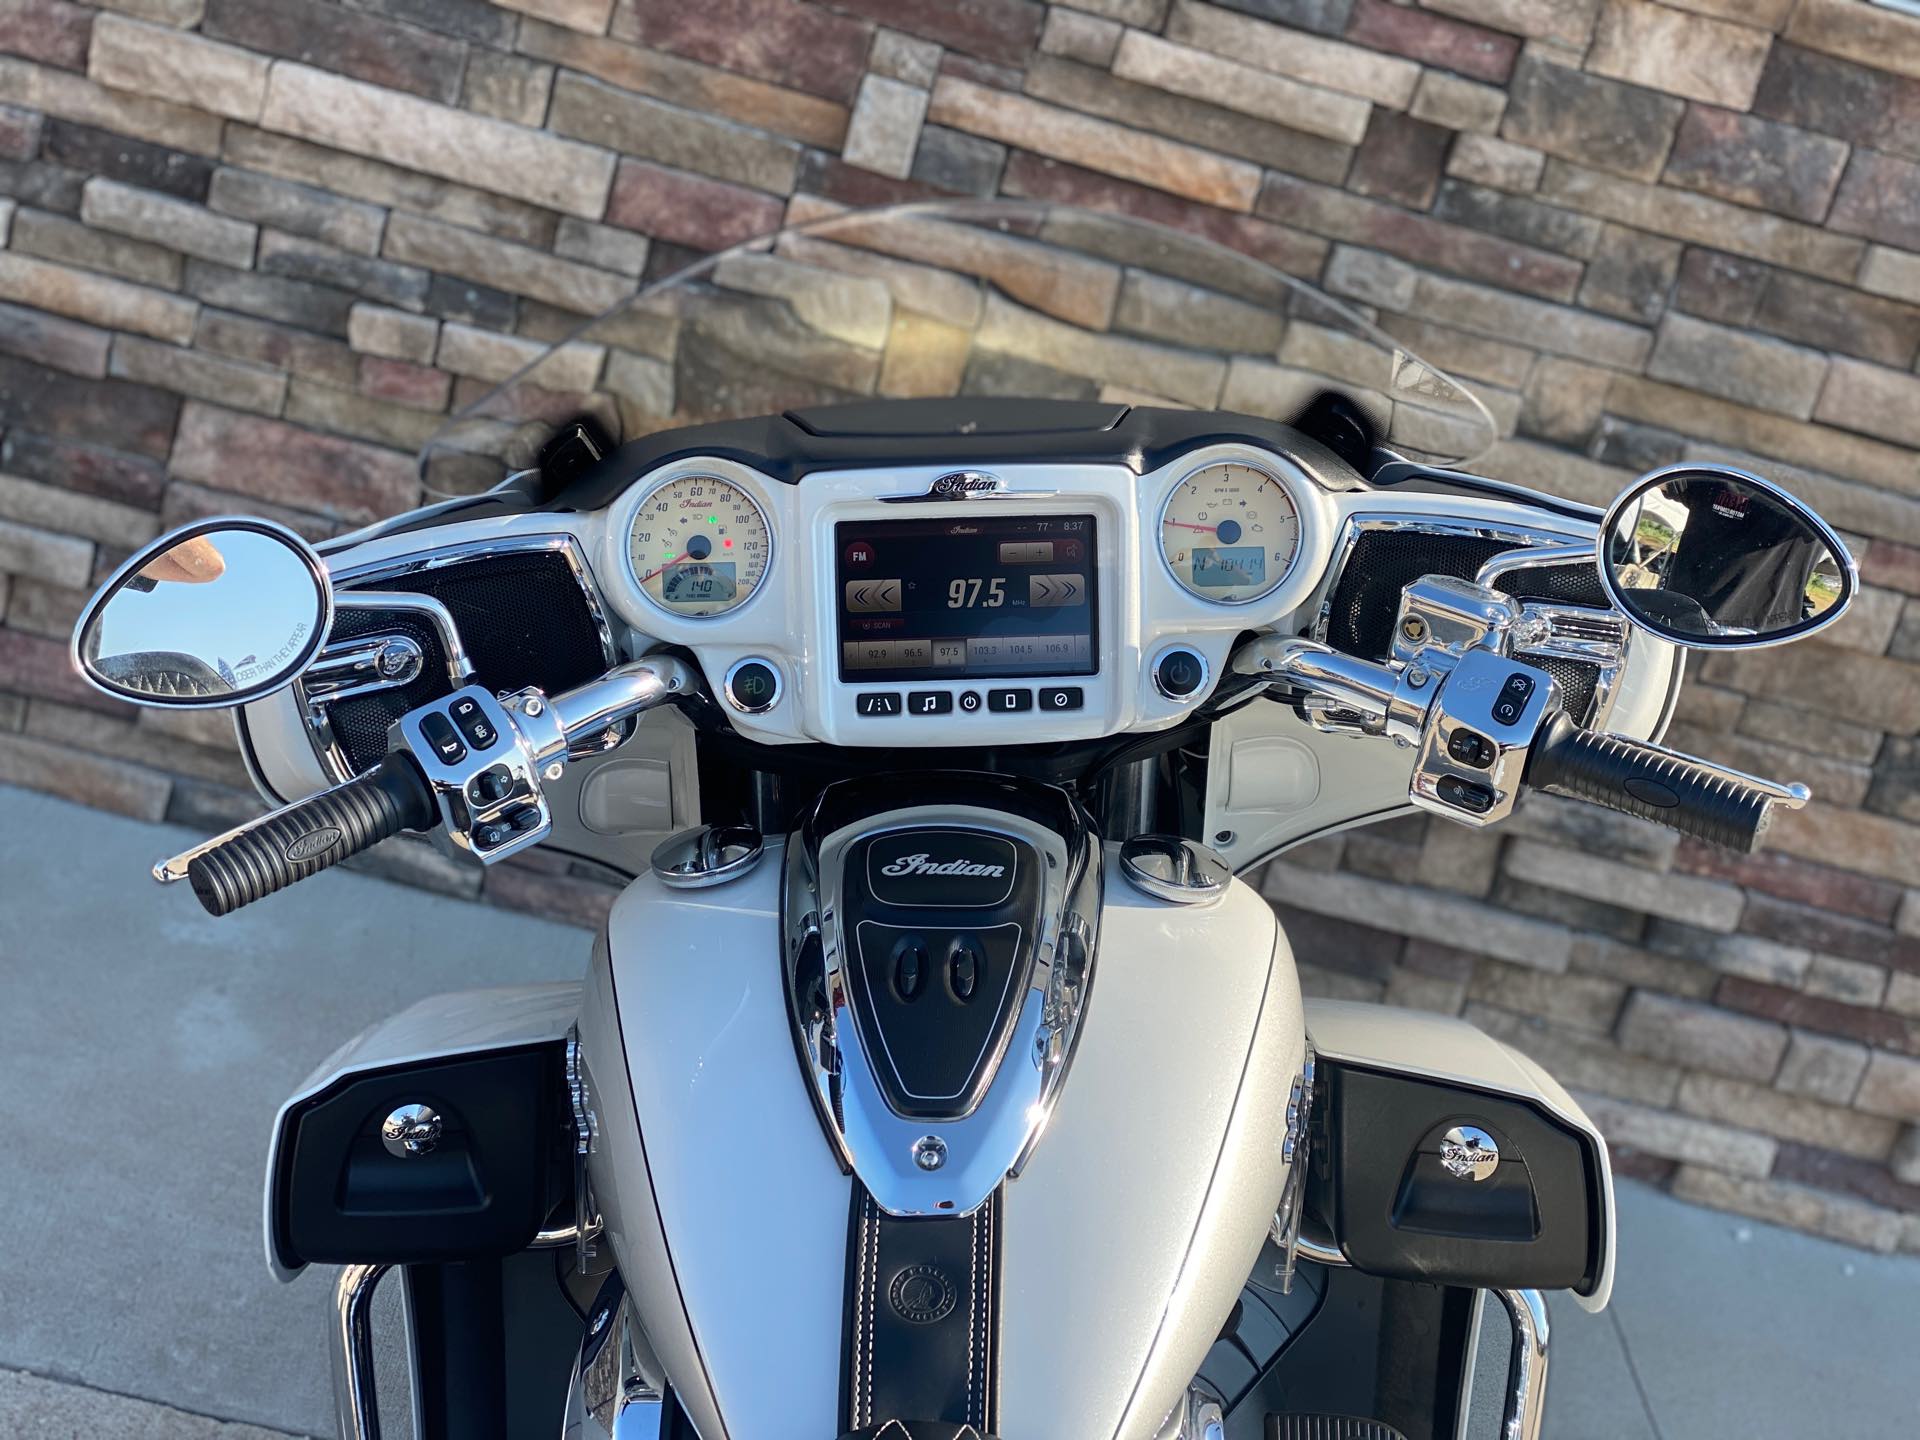 2018 Indian Roadmaster Base at Head Indian Motorcycle